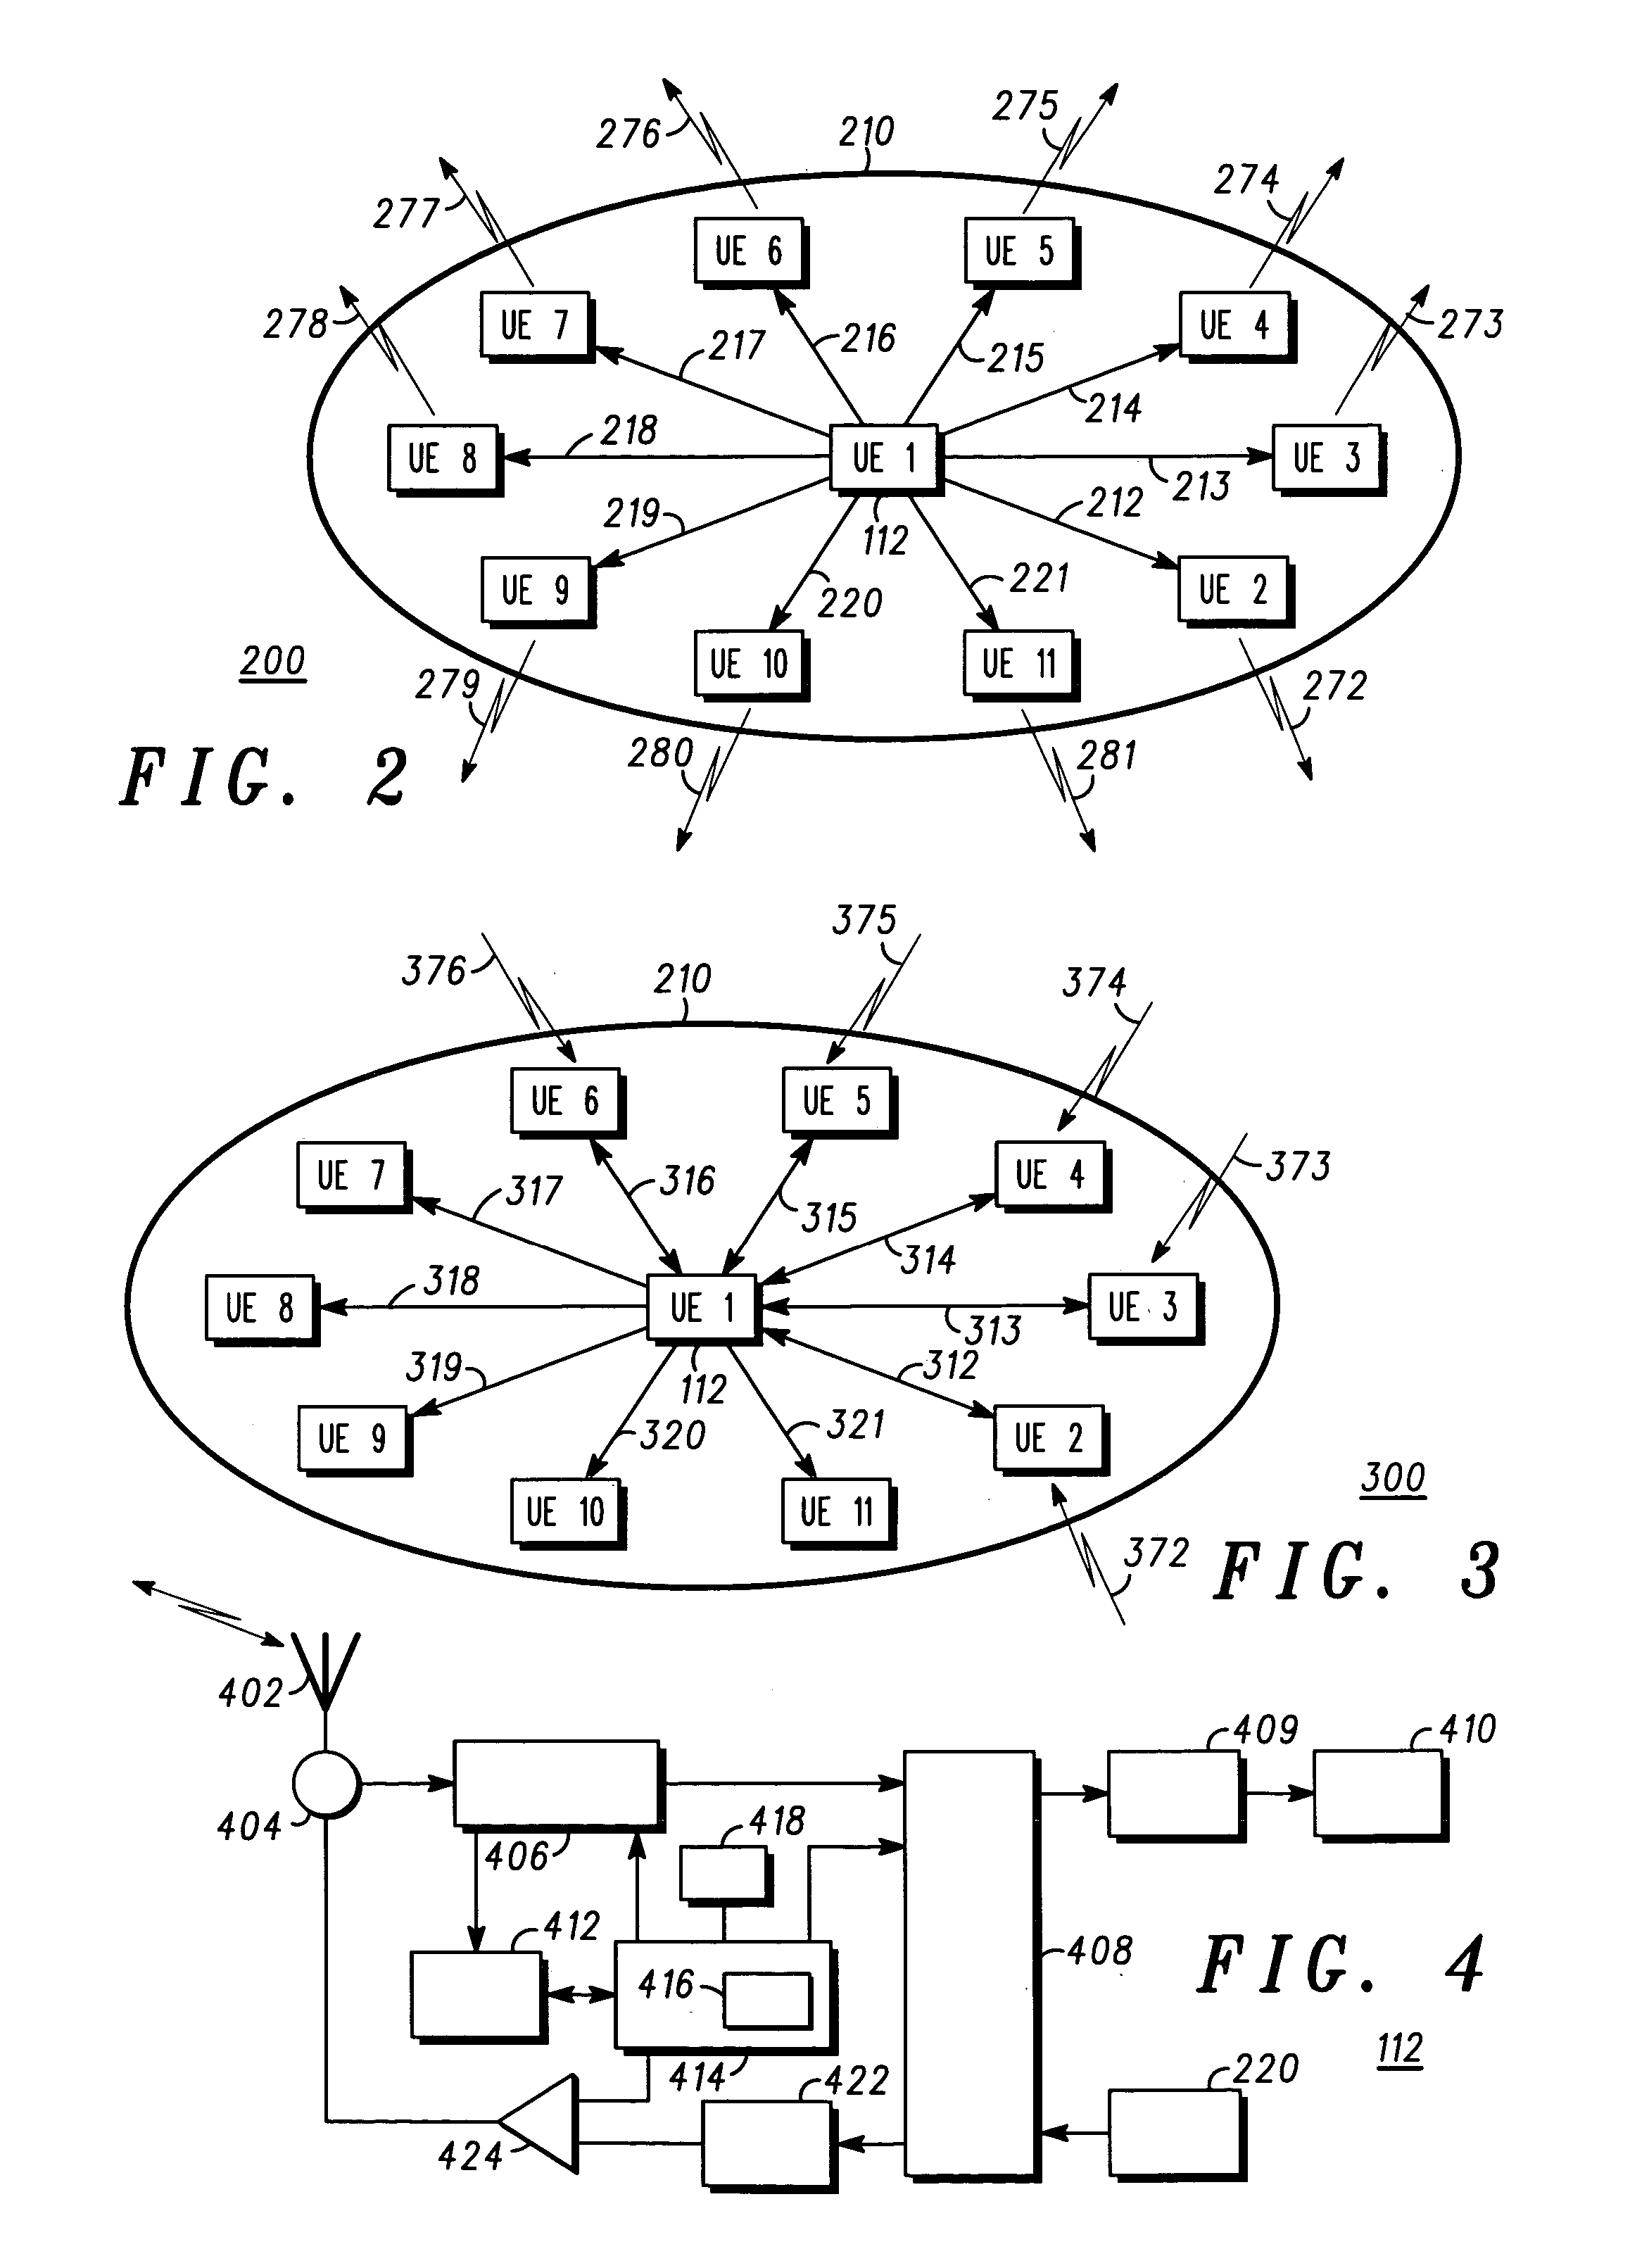 Method for enhancing the communication capability in a wireless telecommunication system